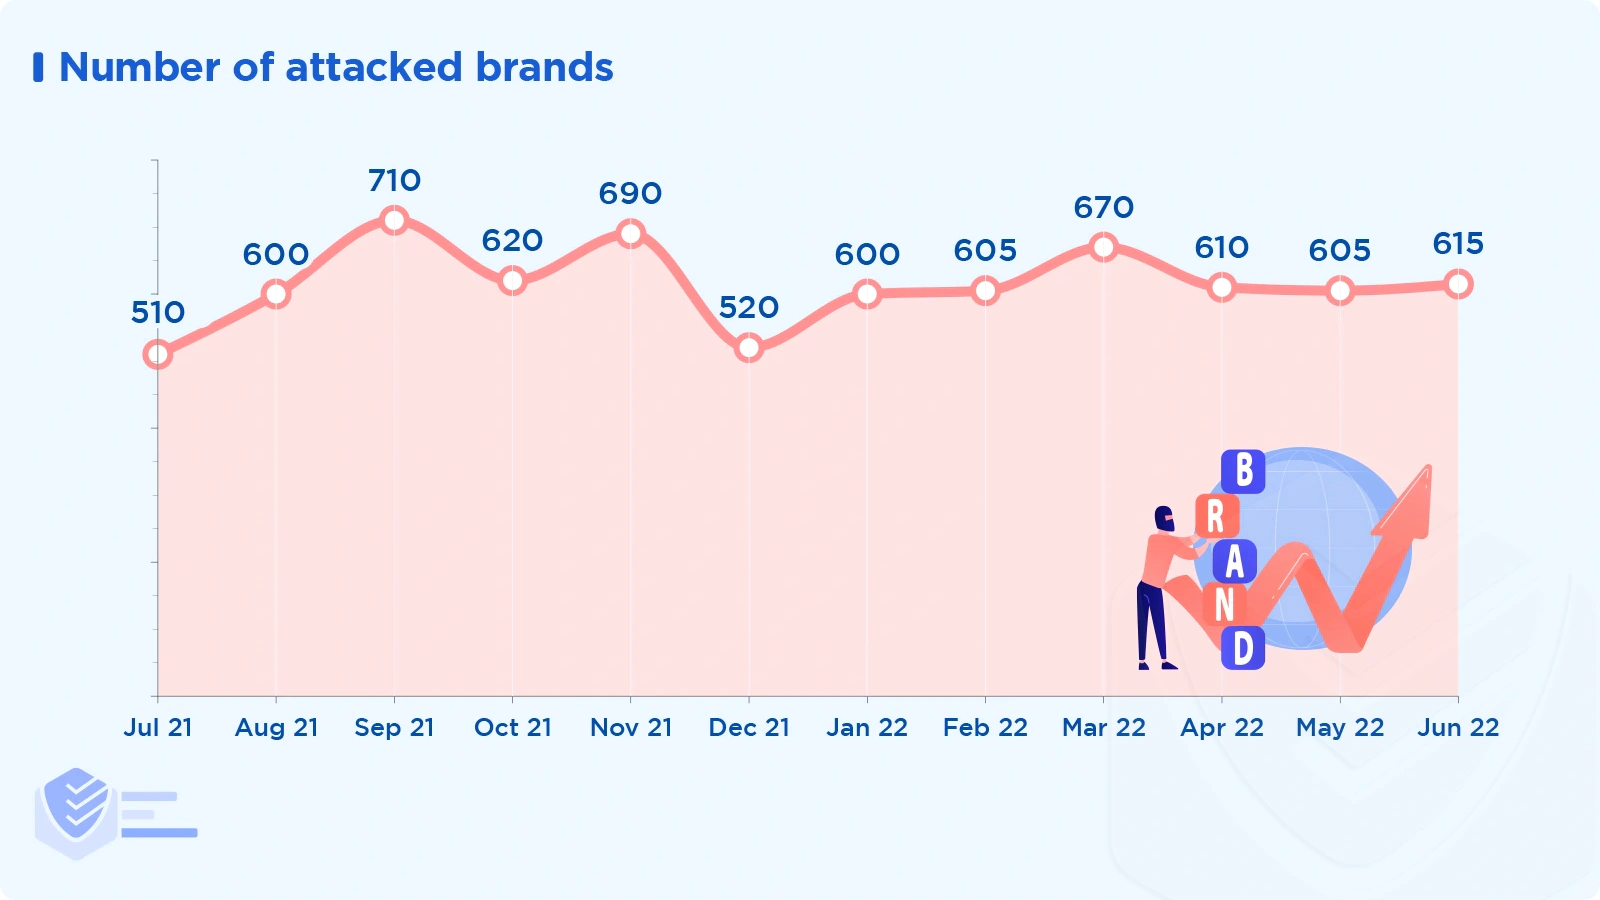 Number of attacked brands